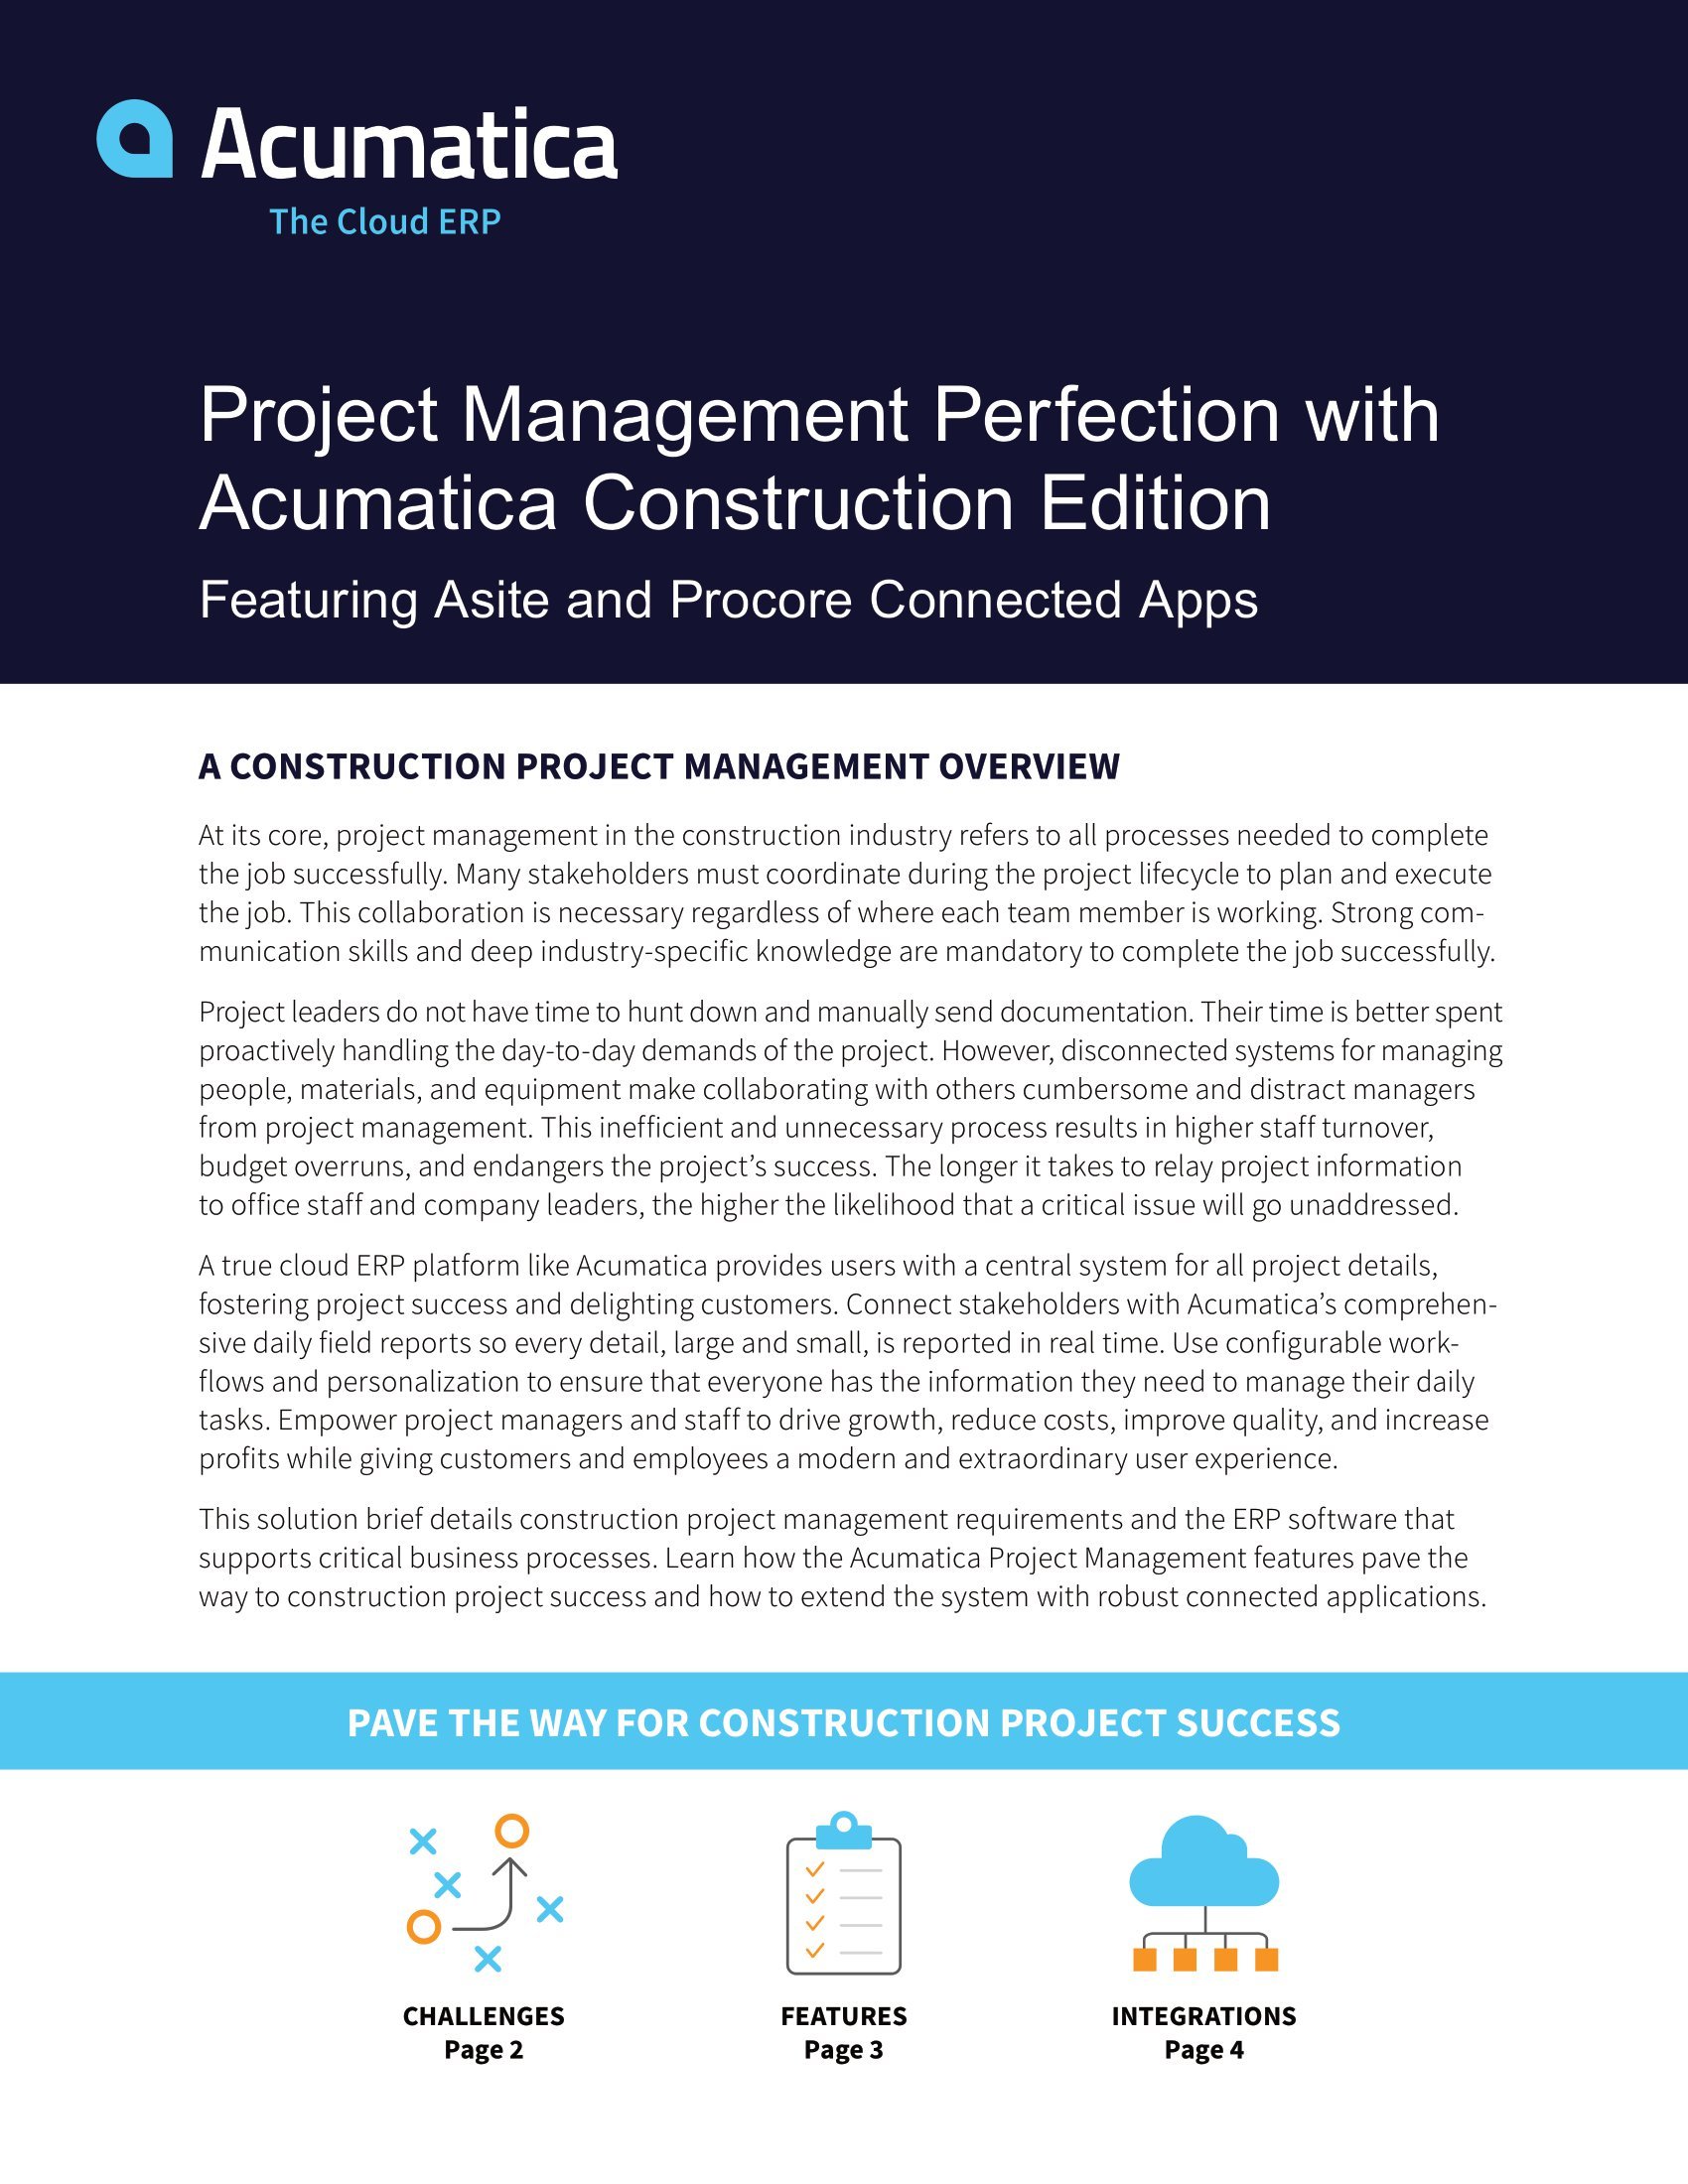 What Do Construction Project Managers Need to Succeed? A Centralized, Extensible System. , page 0